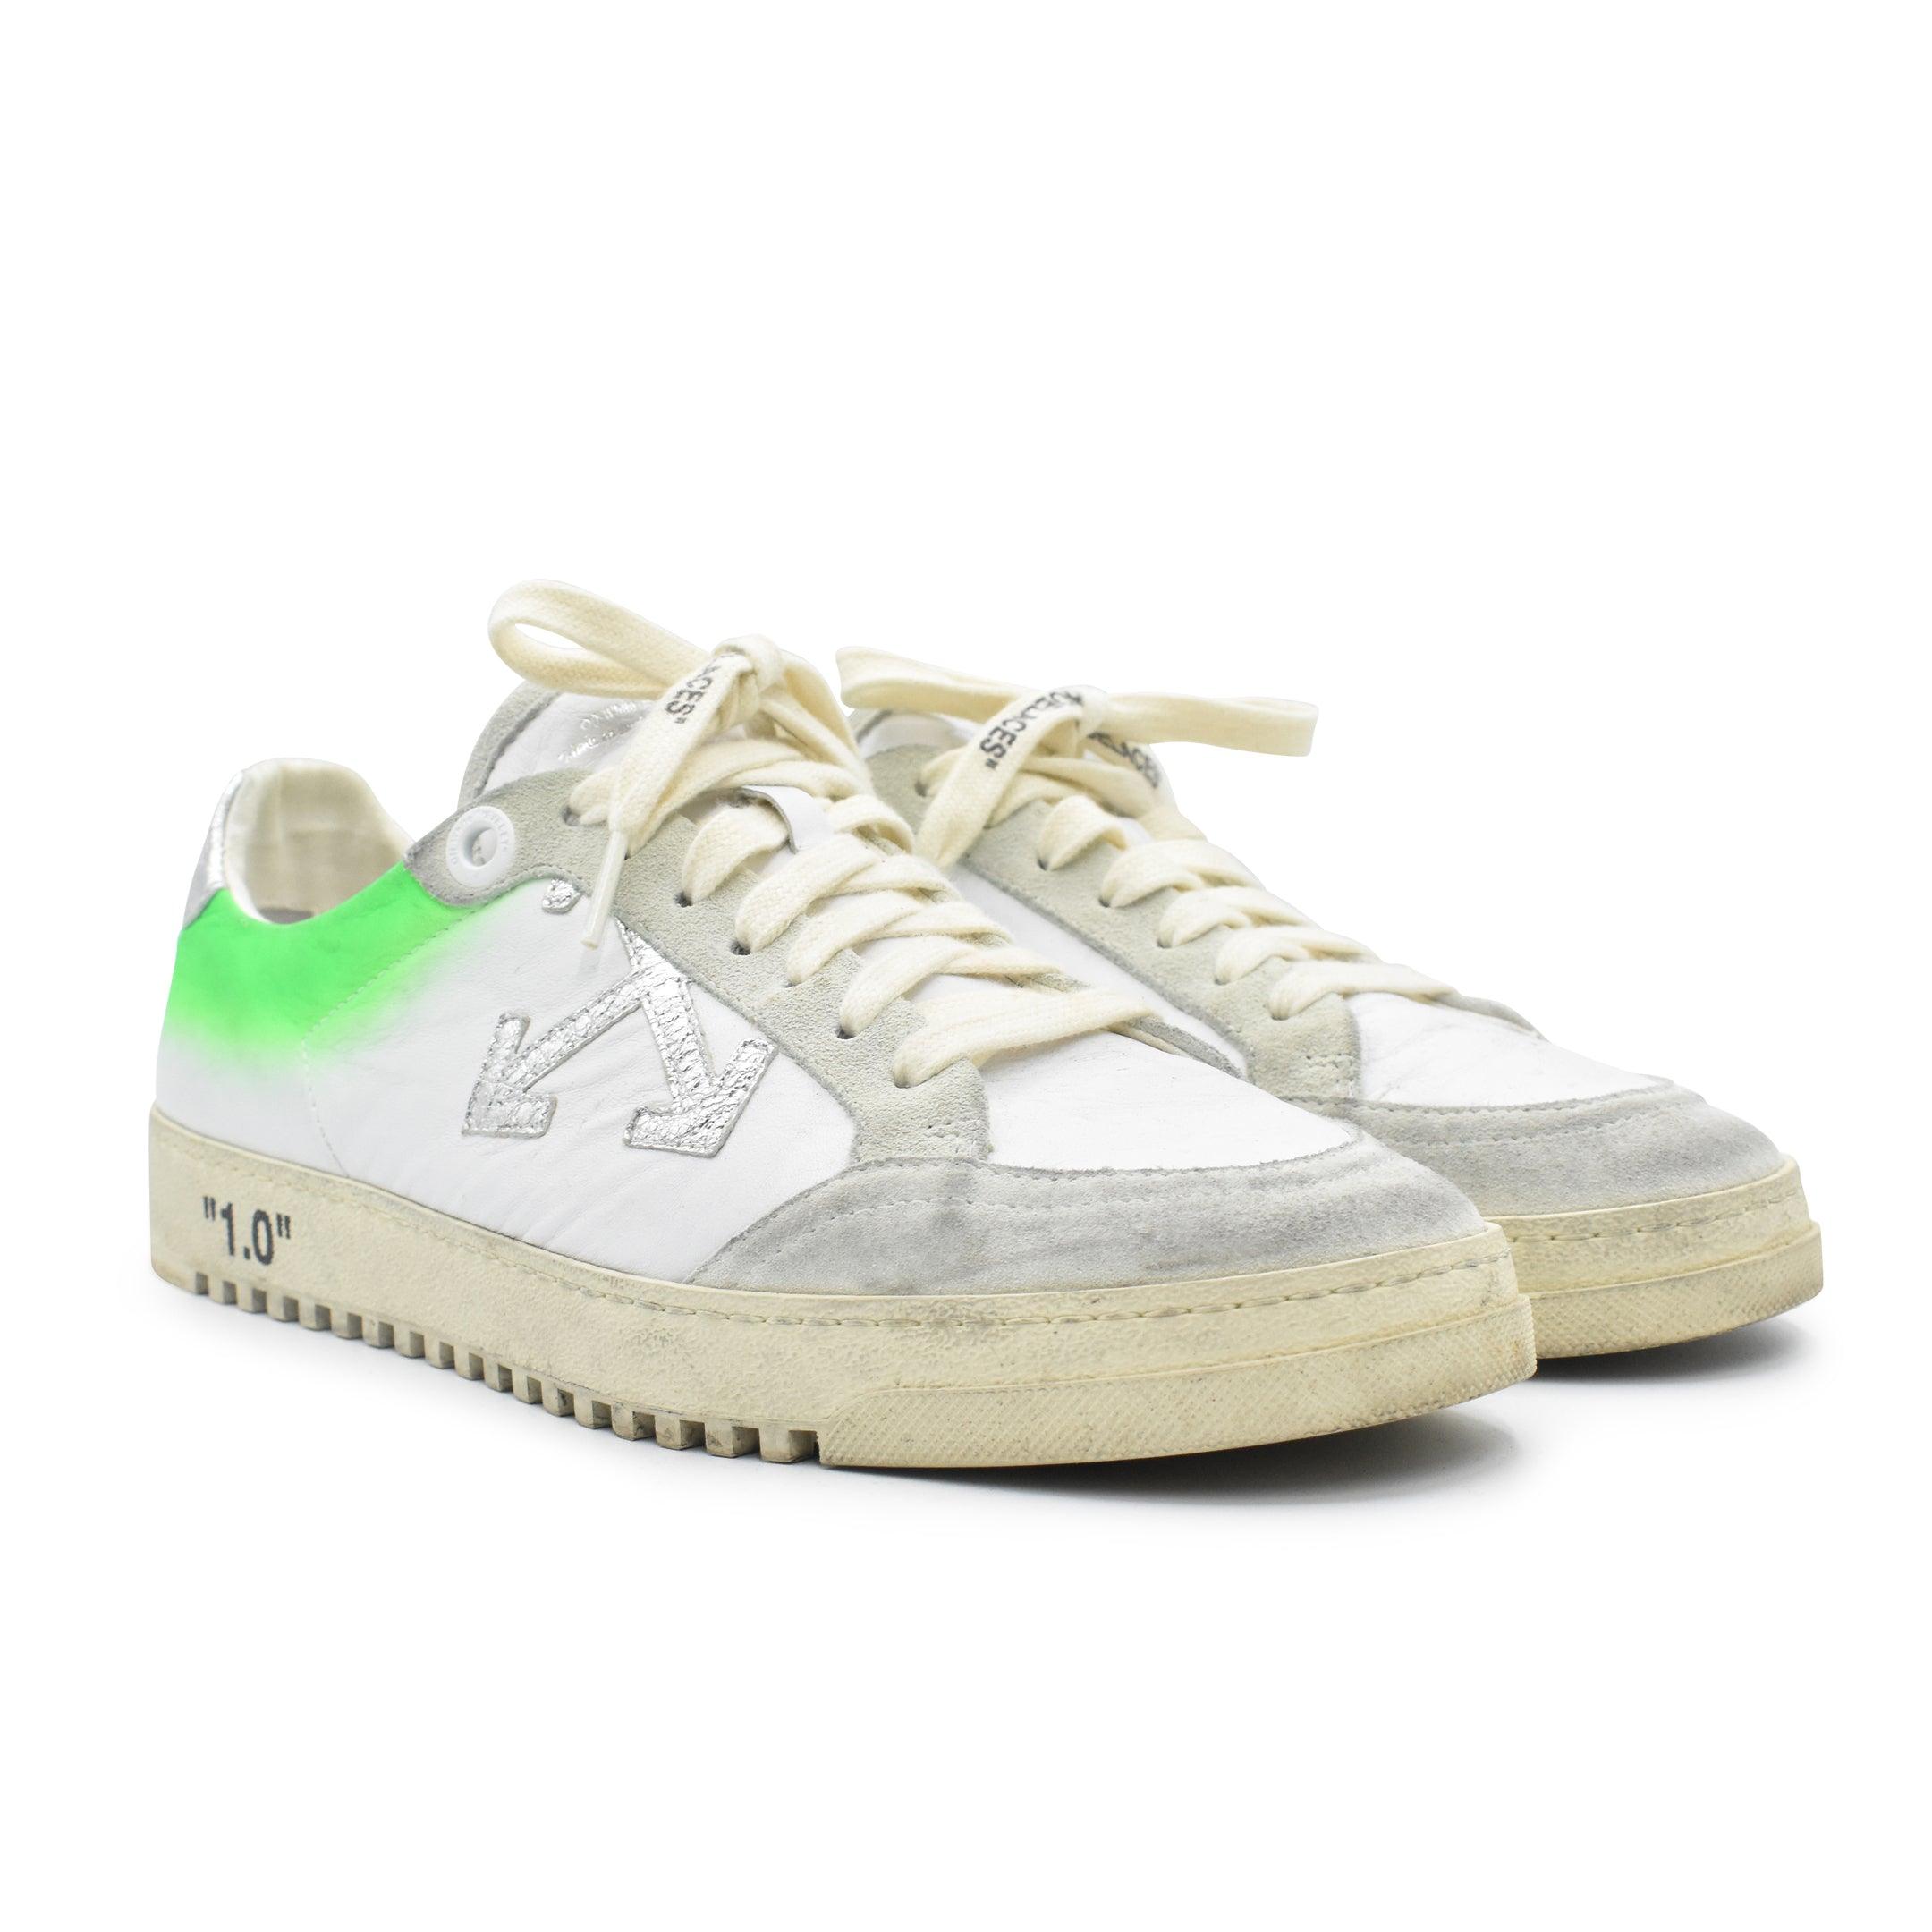 Off-White 'Bold 1.0' Sneakers - Men's 42 - Fashionably Yours